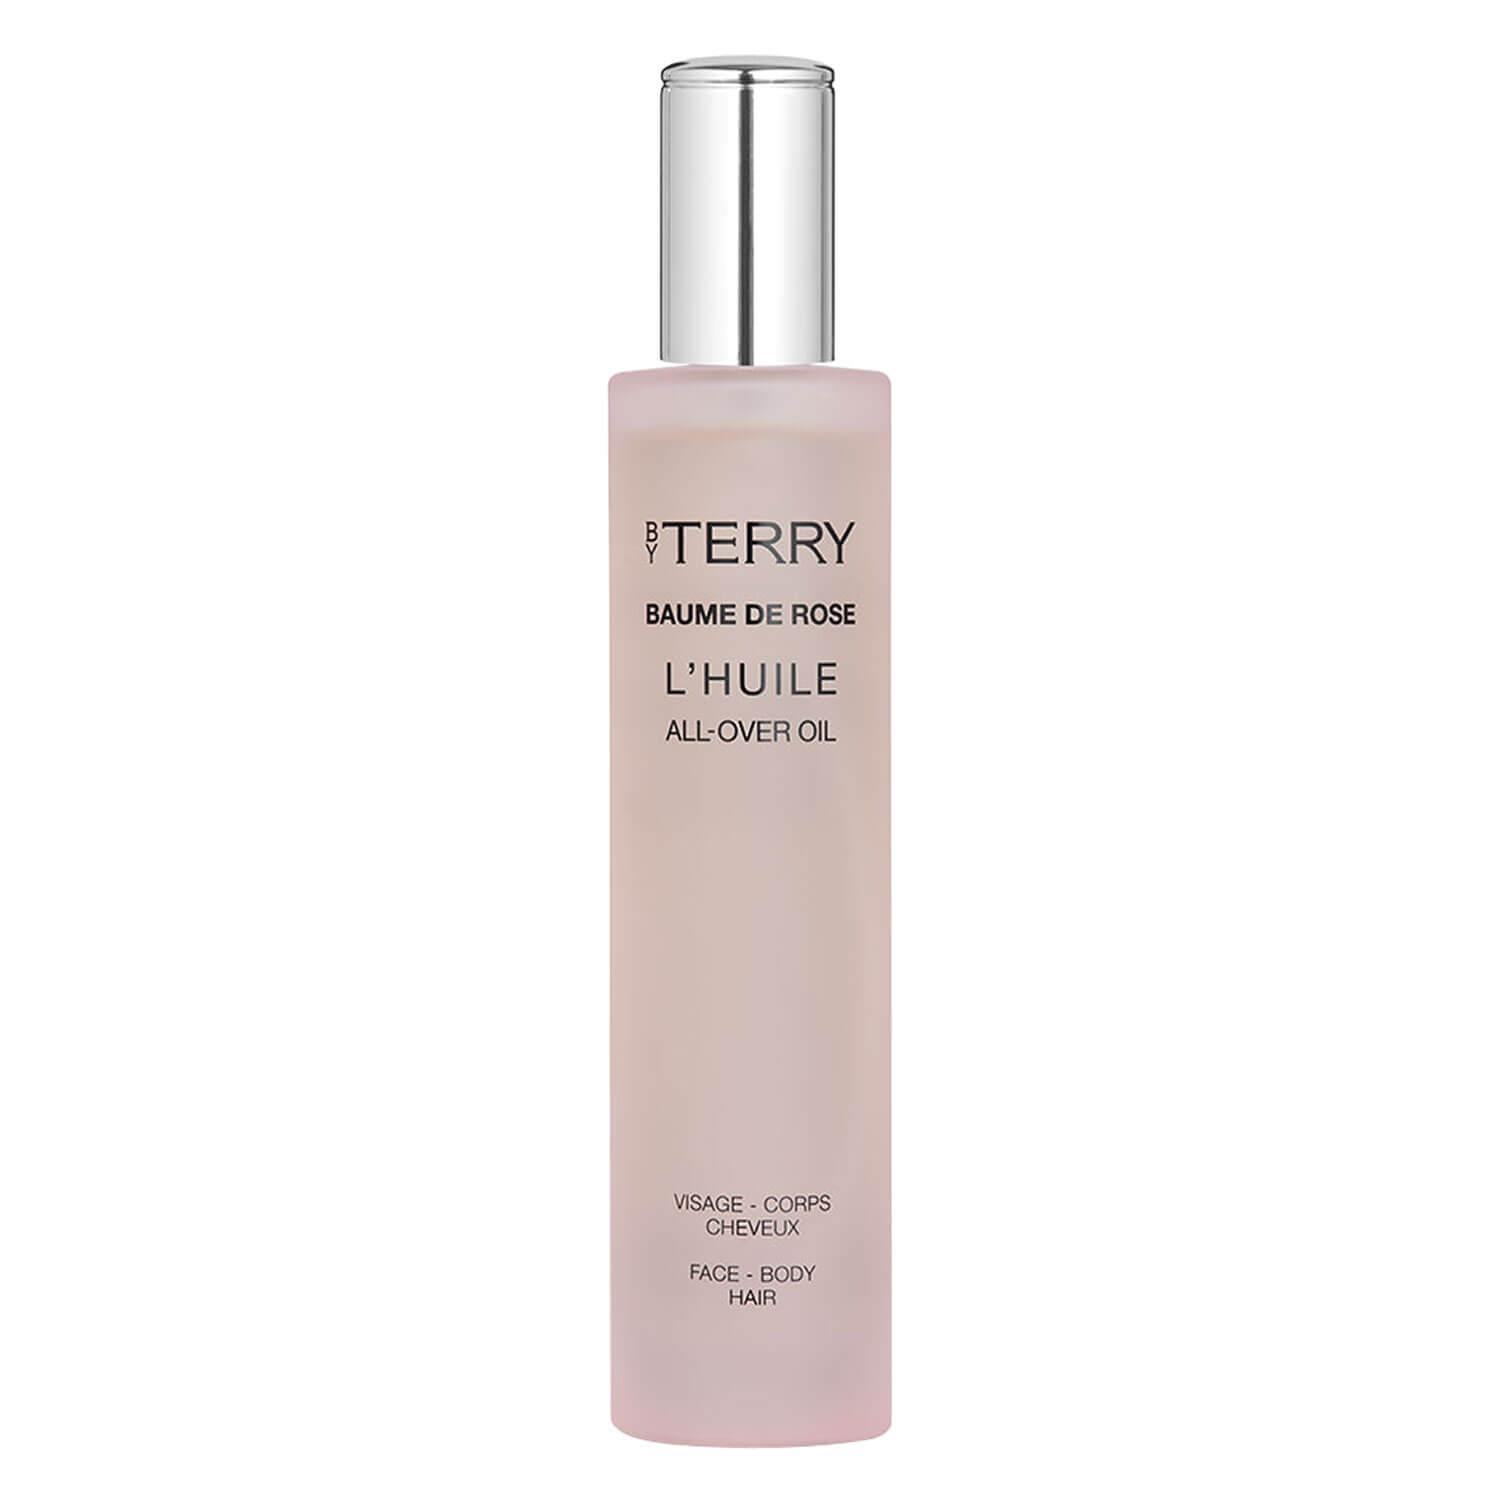 By Terry Care - Baume de Rose All-Over Oil